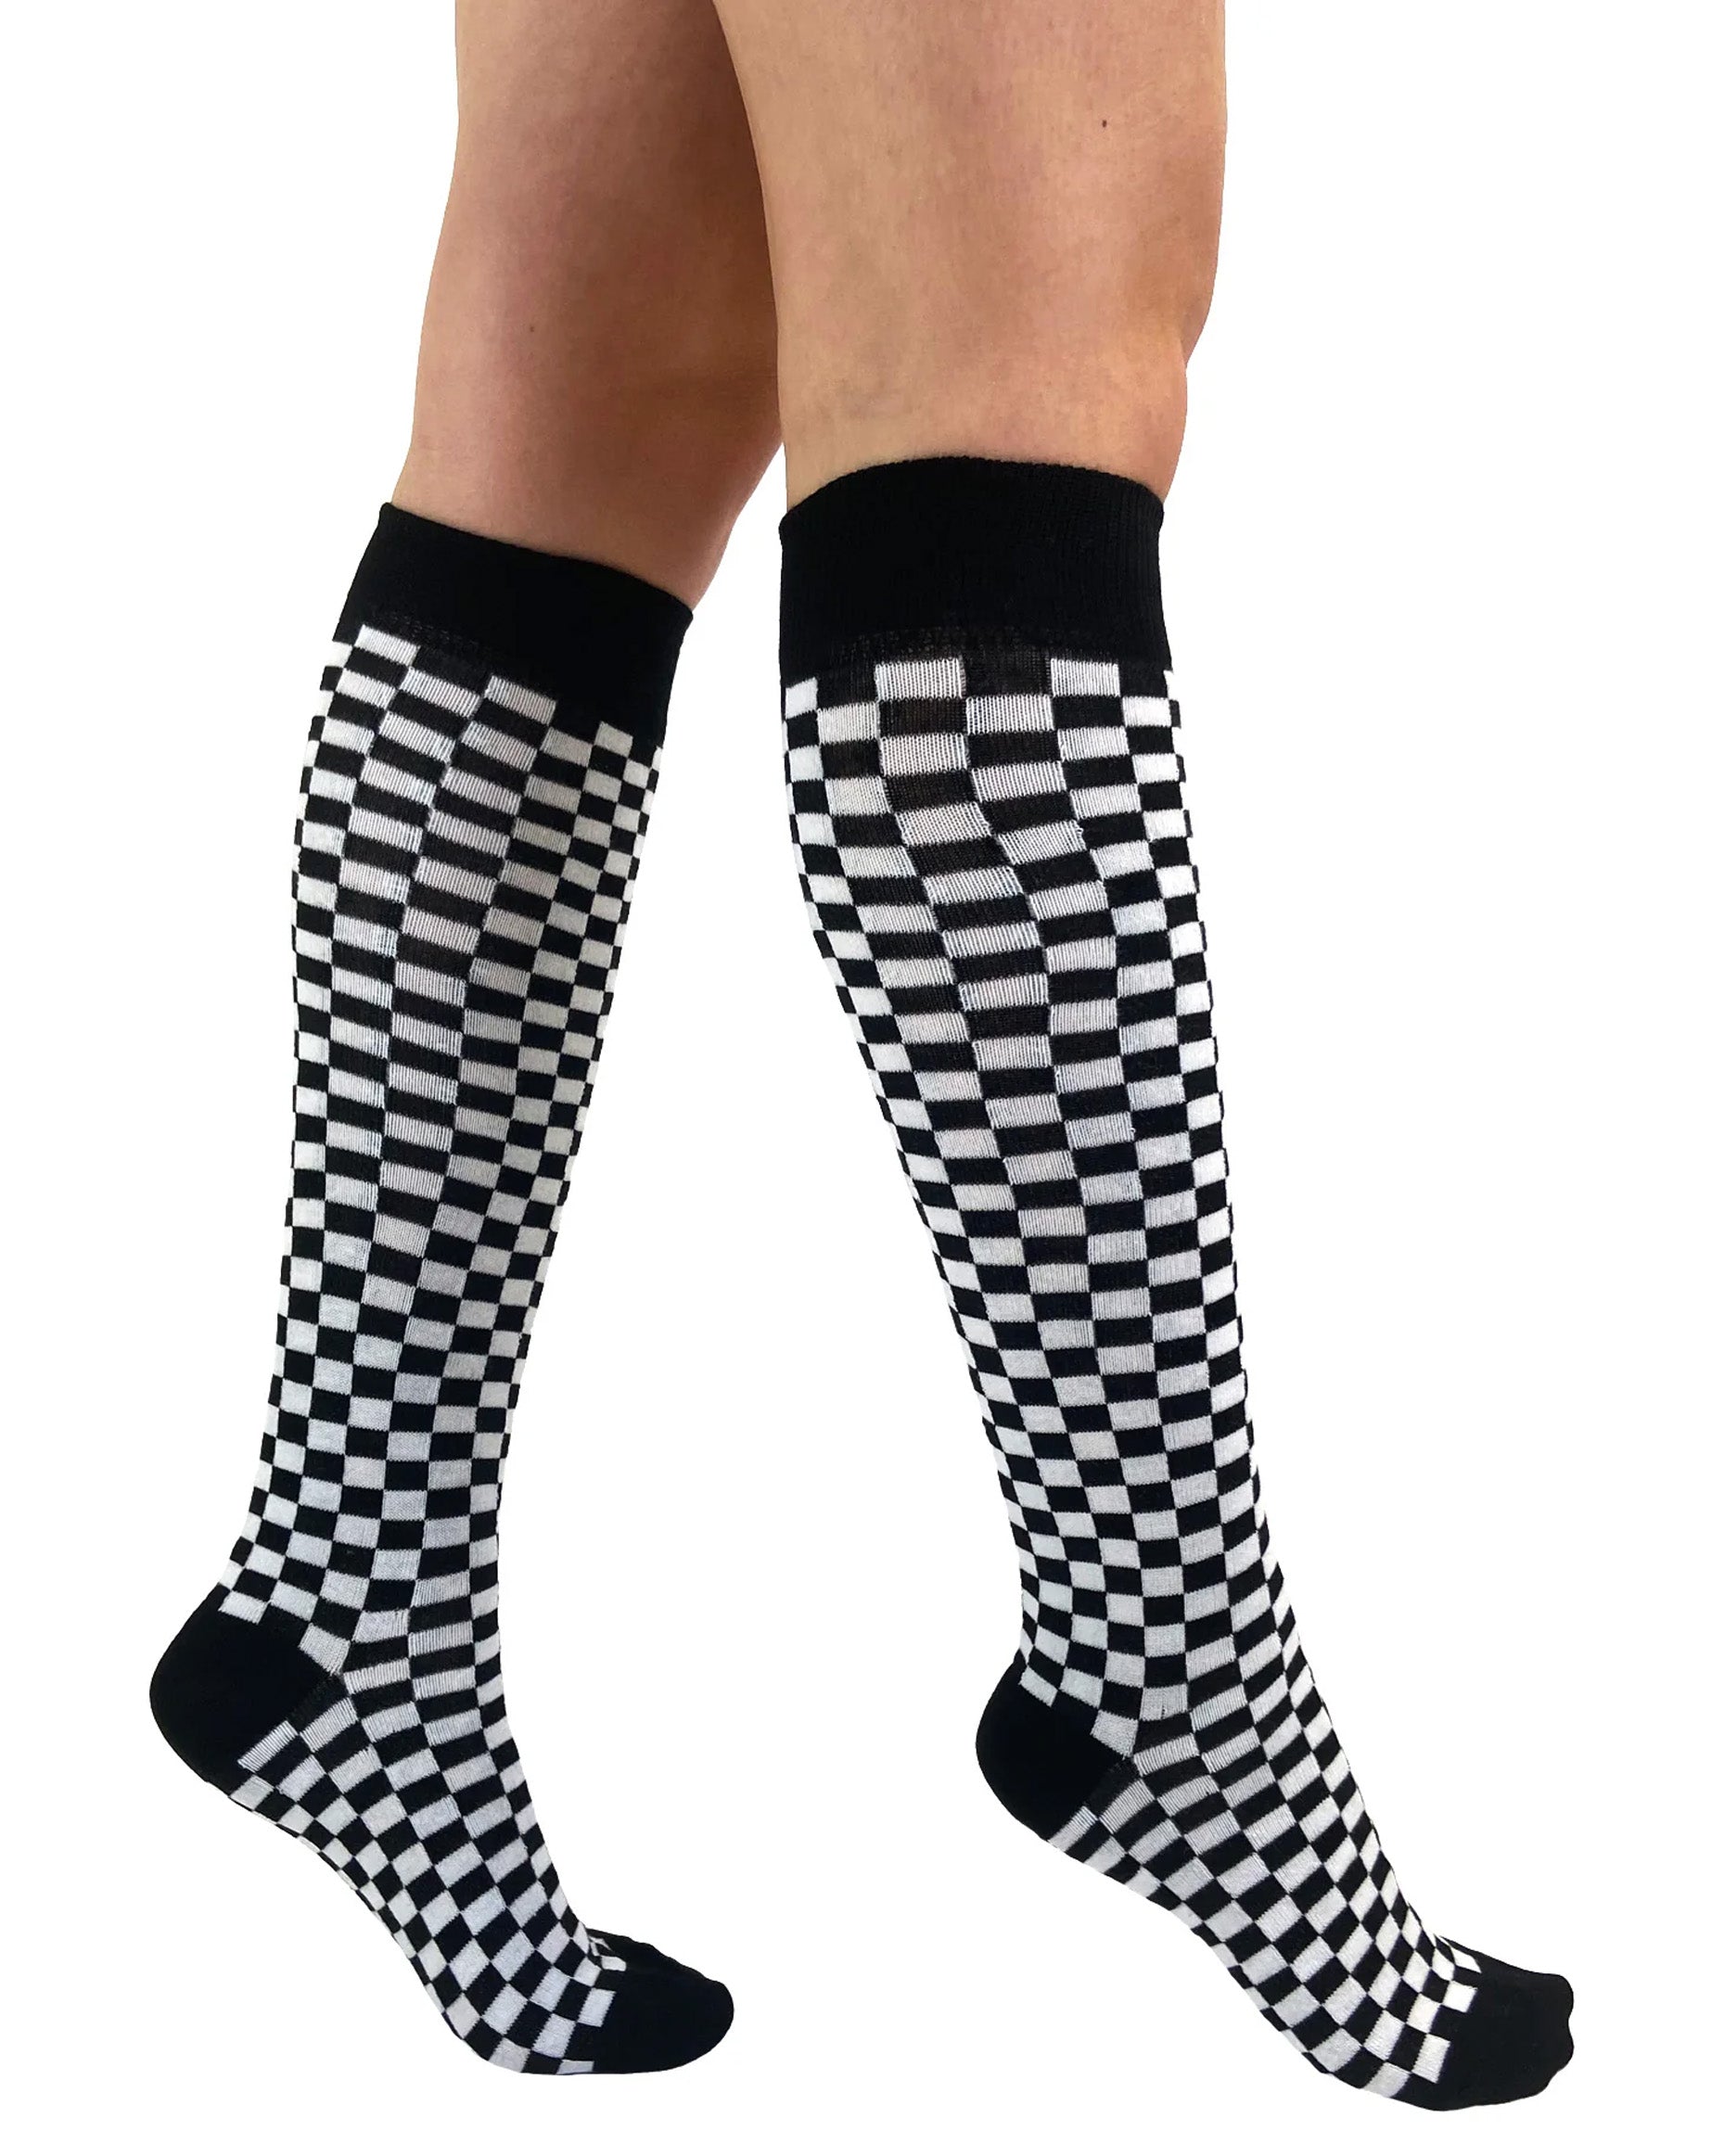 Pamela Mann Checkered Knee-Highs - Black and white checkered square patterned knee-high cotton socks with black cuff, toe and heel. Side view.